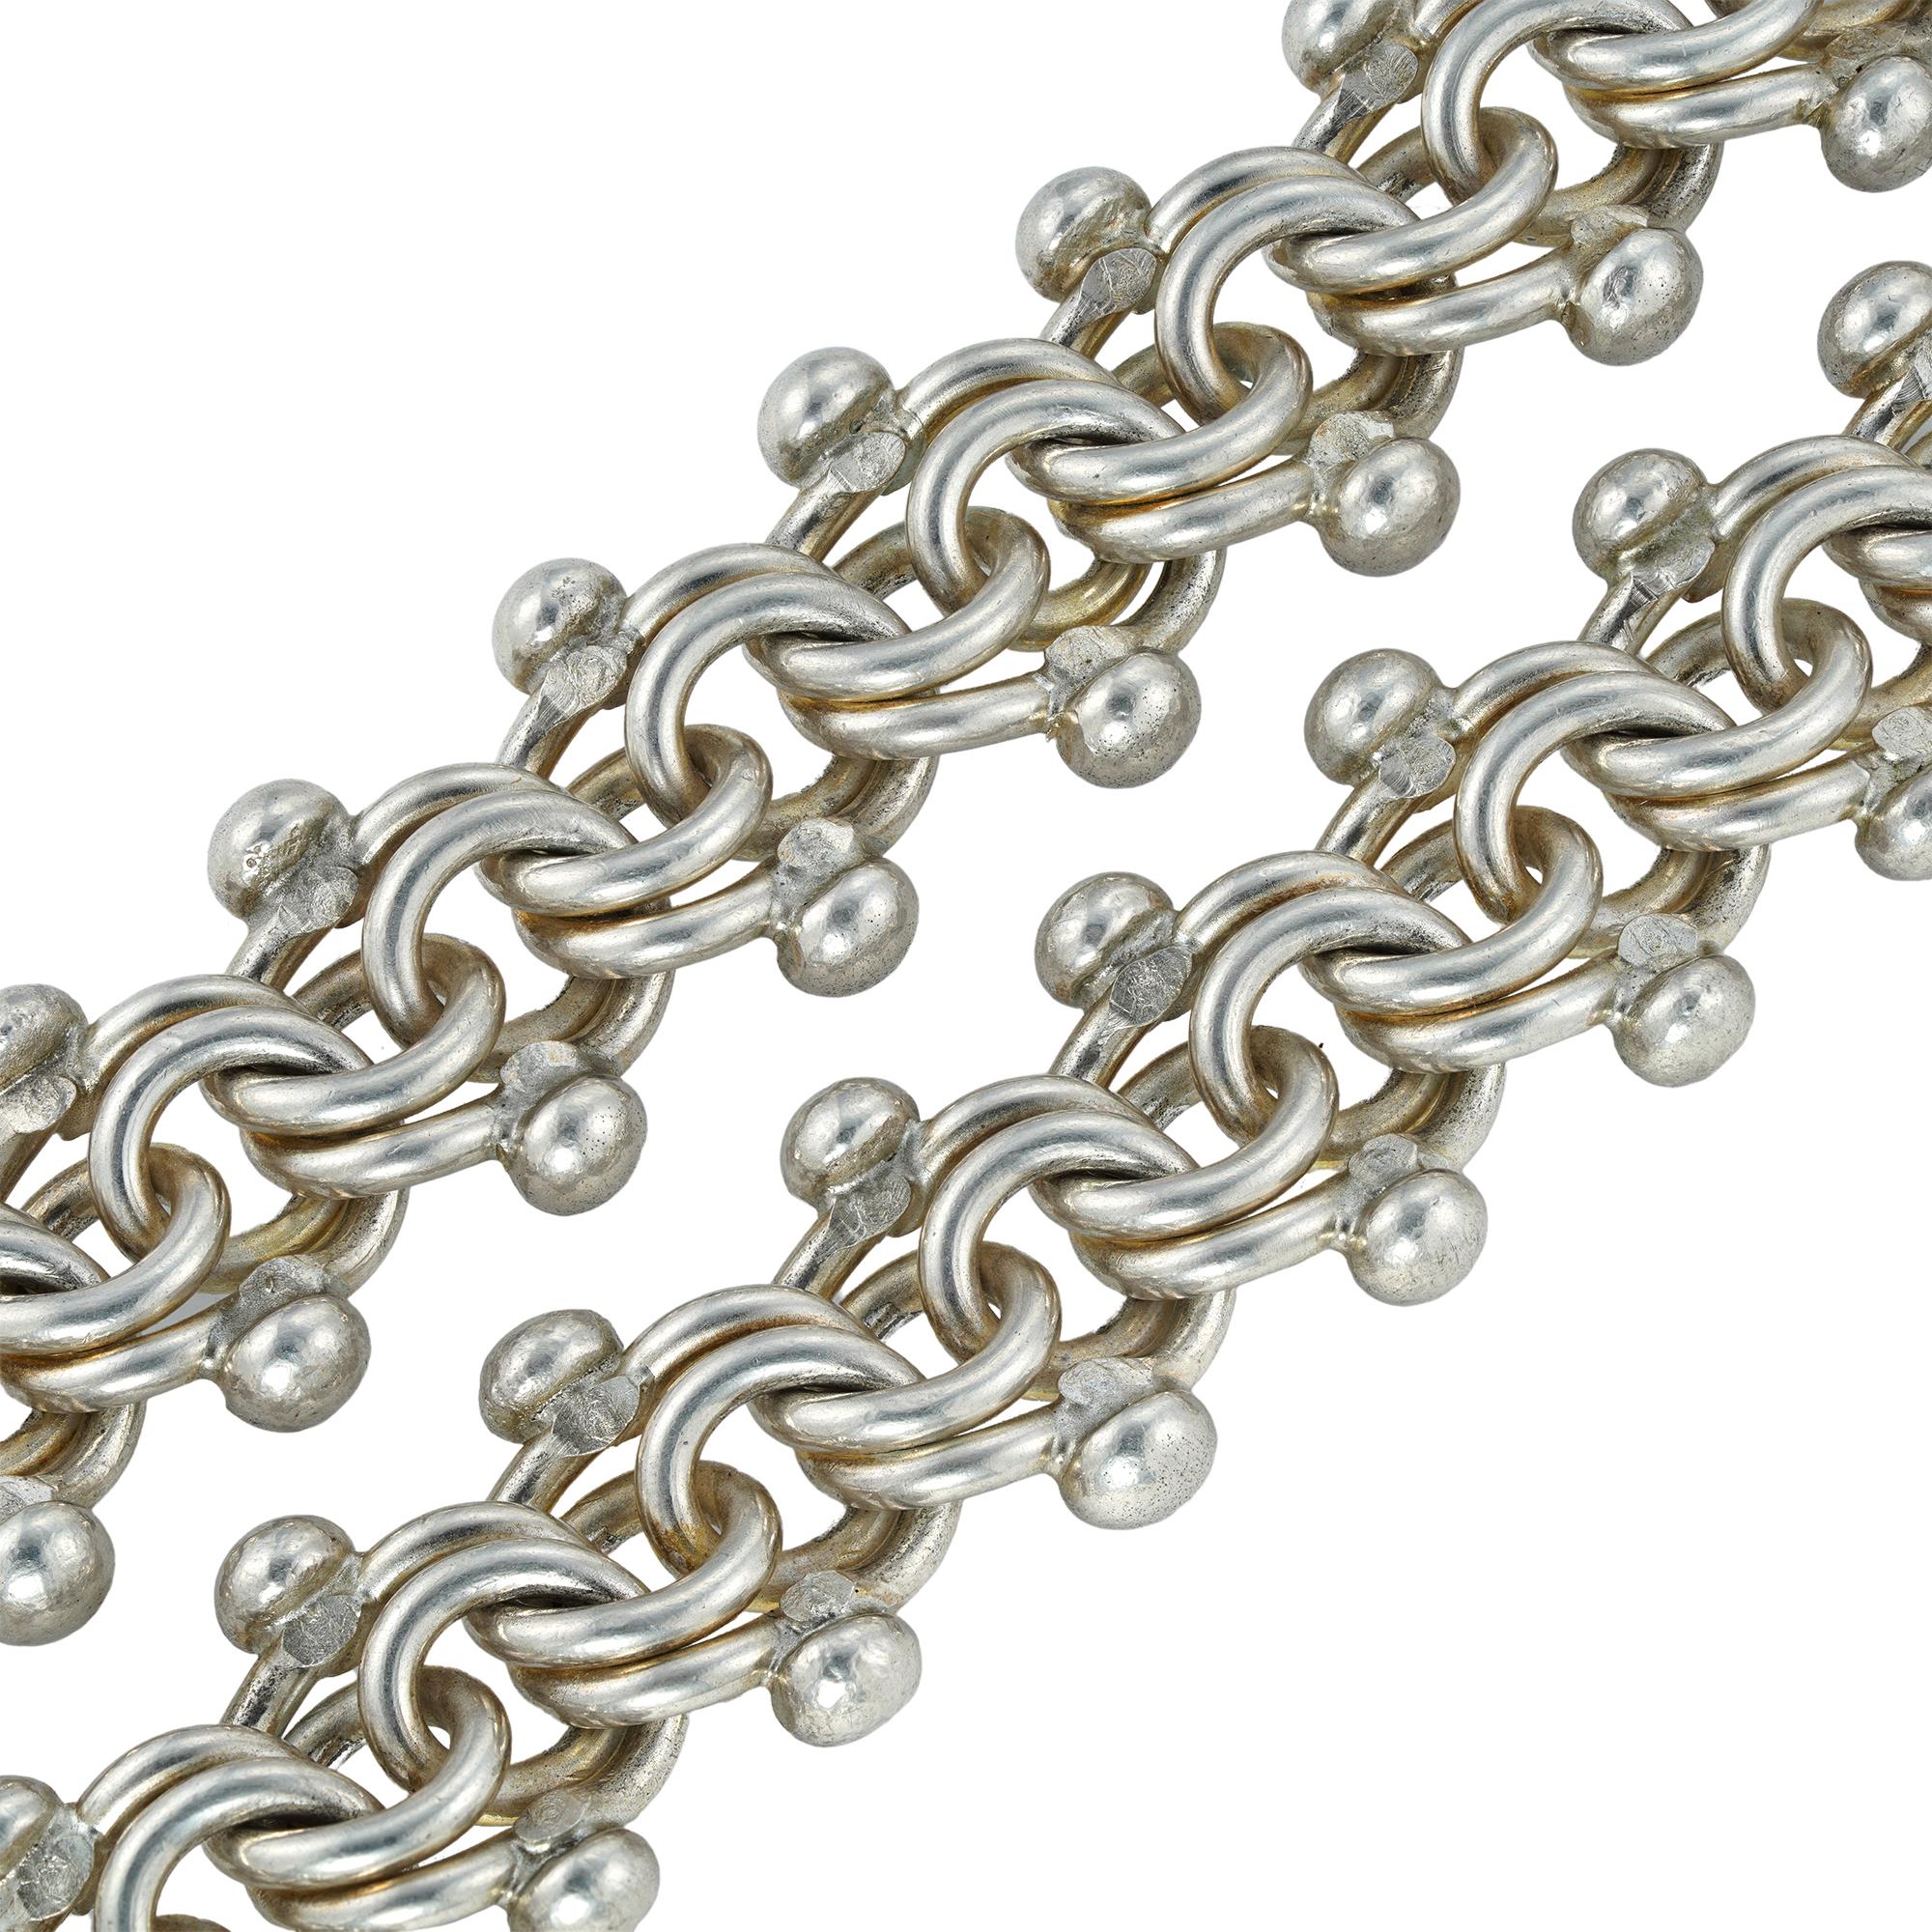 A handmade silver Troubadour chain by Lucie Heskett-Brem the Gold Weaver of Lucerne, consisting of forty interlocking links, made in silver, hallmarked sterling silver, London, 2019, measuring approximately 45 x 1.8cm, gross weight 157.7 grams.

A